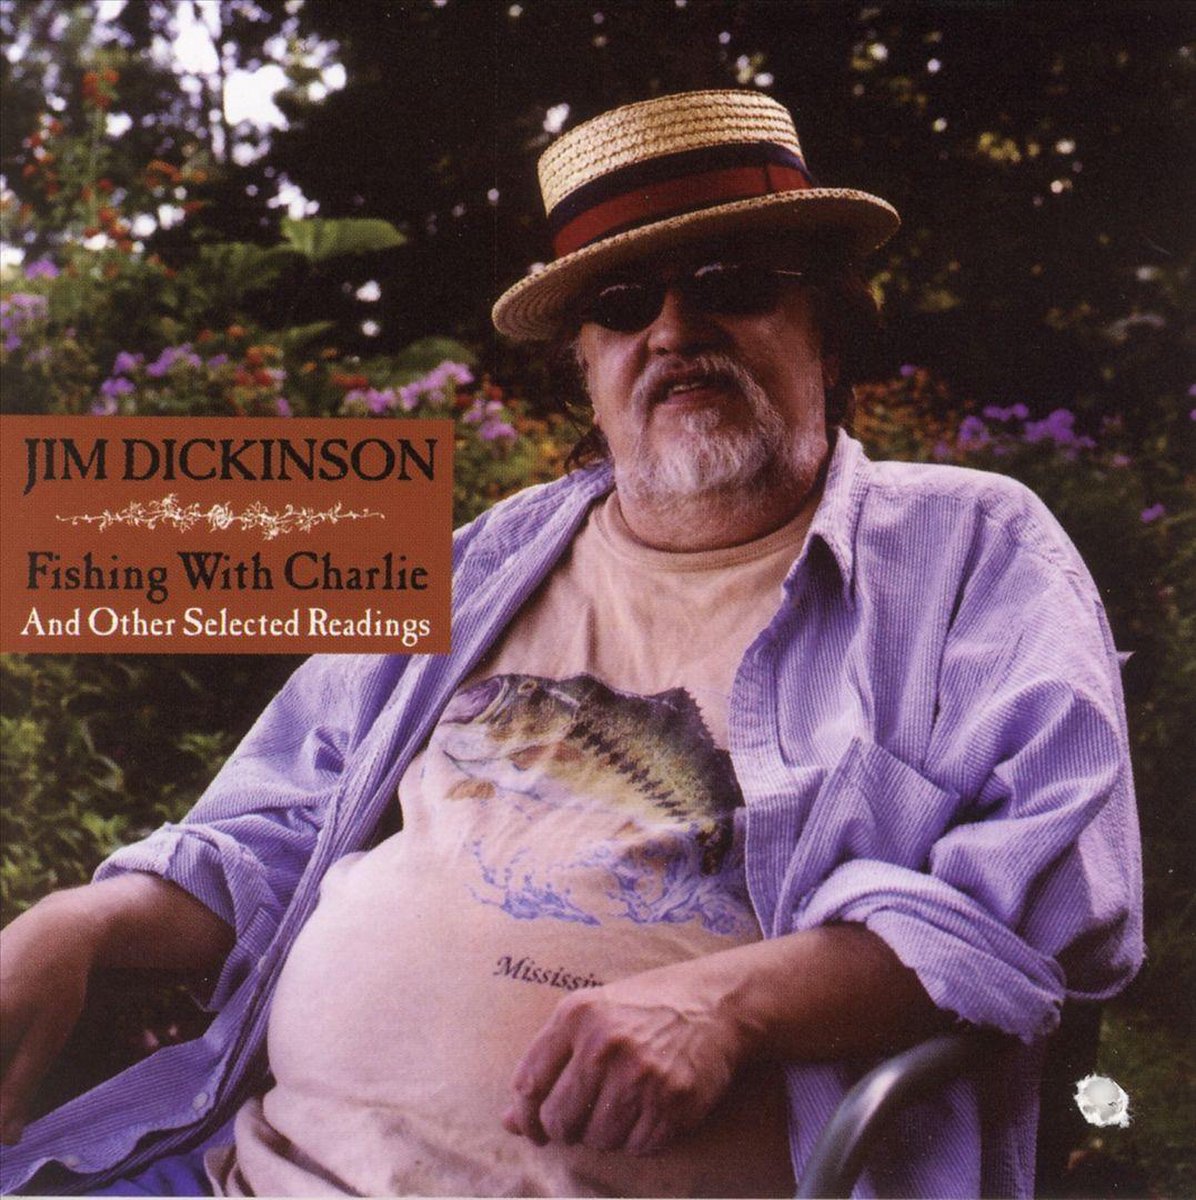 Fishing with Charlie and Other Selected Readings - Jim Dickinson